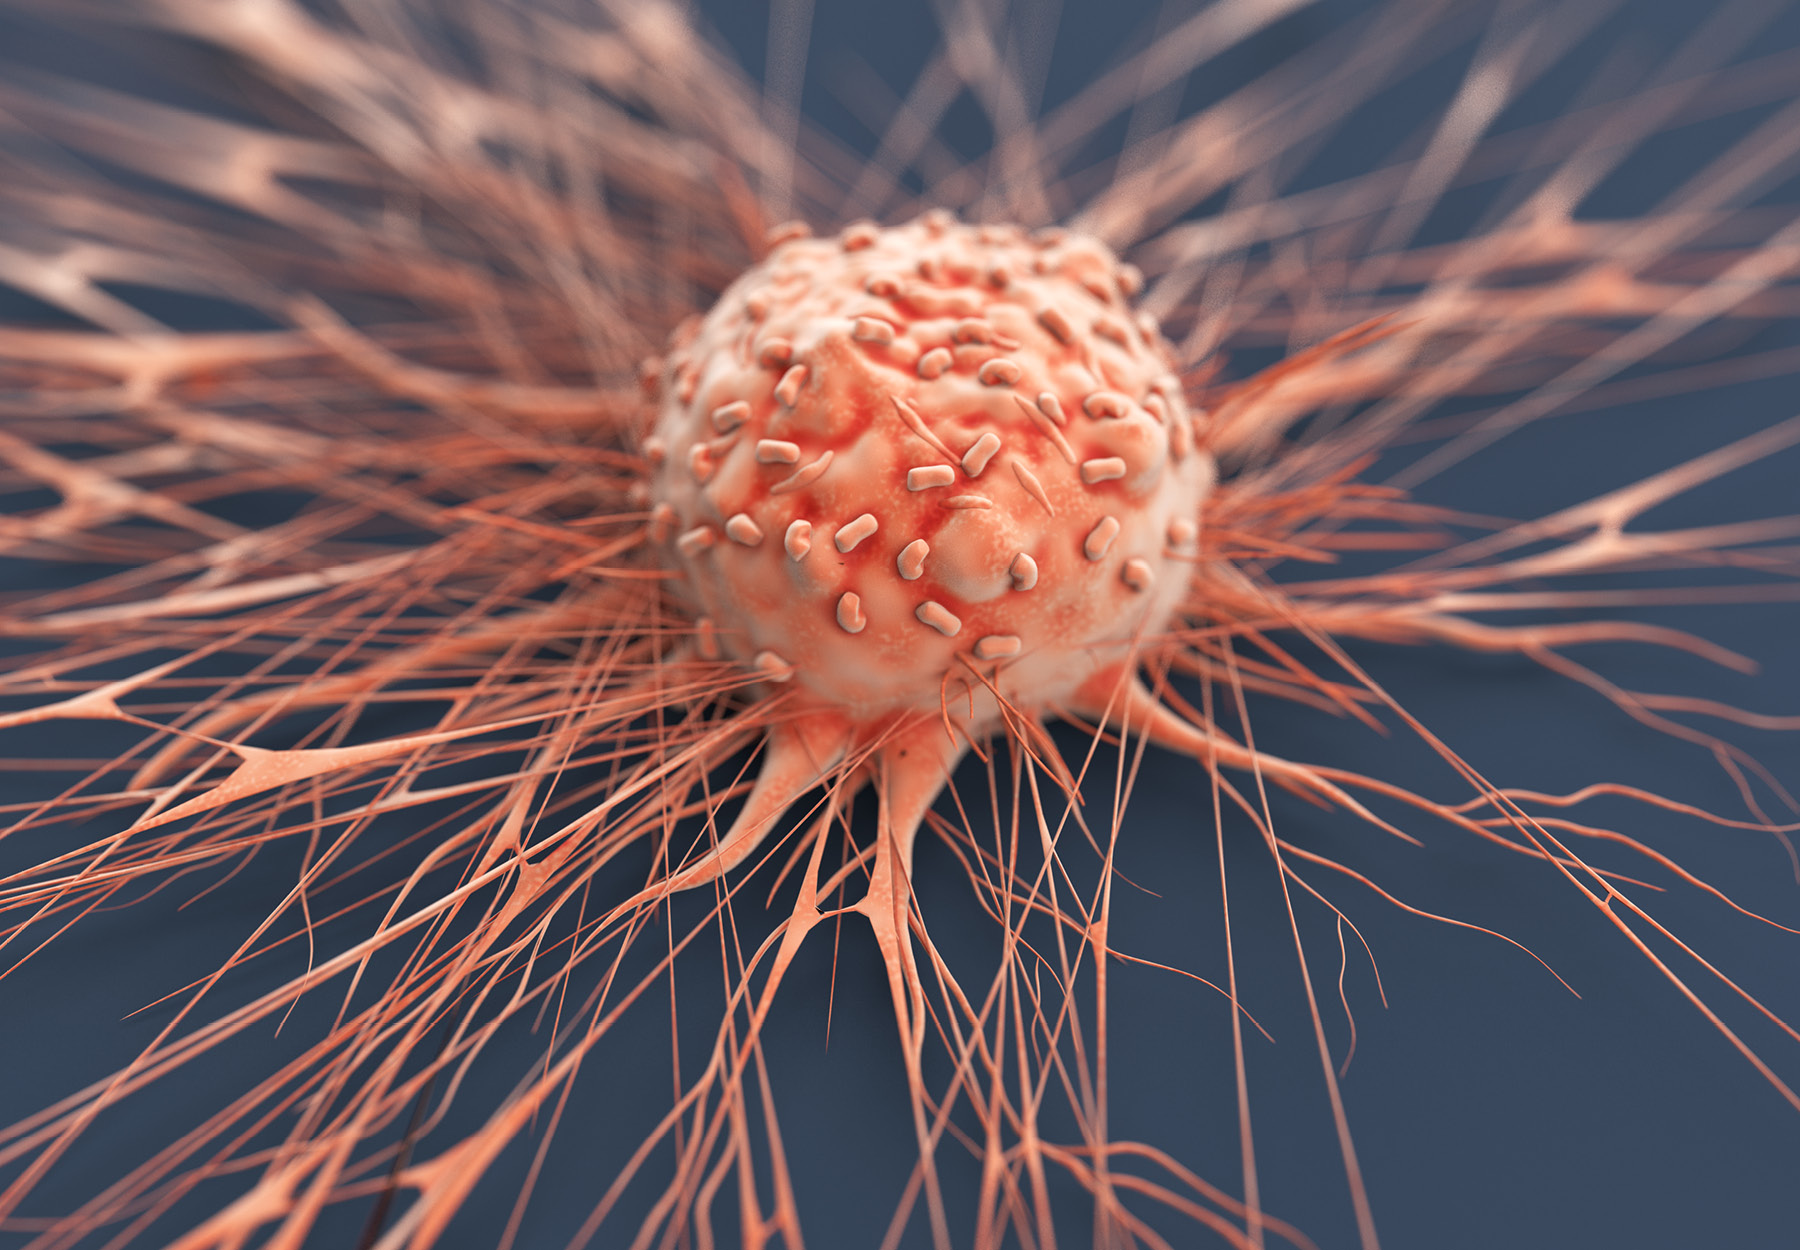 Human Cancer Cell stock photo in orange with a dark grey background. iStock image.